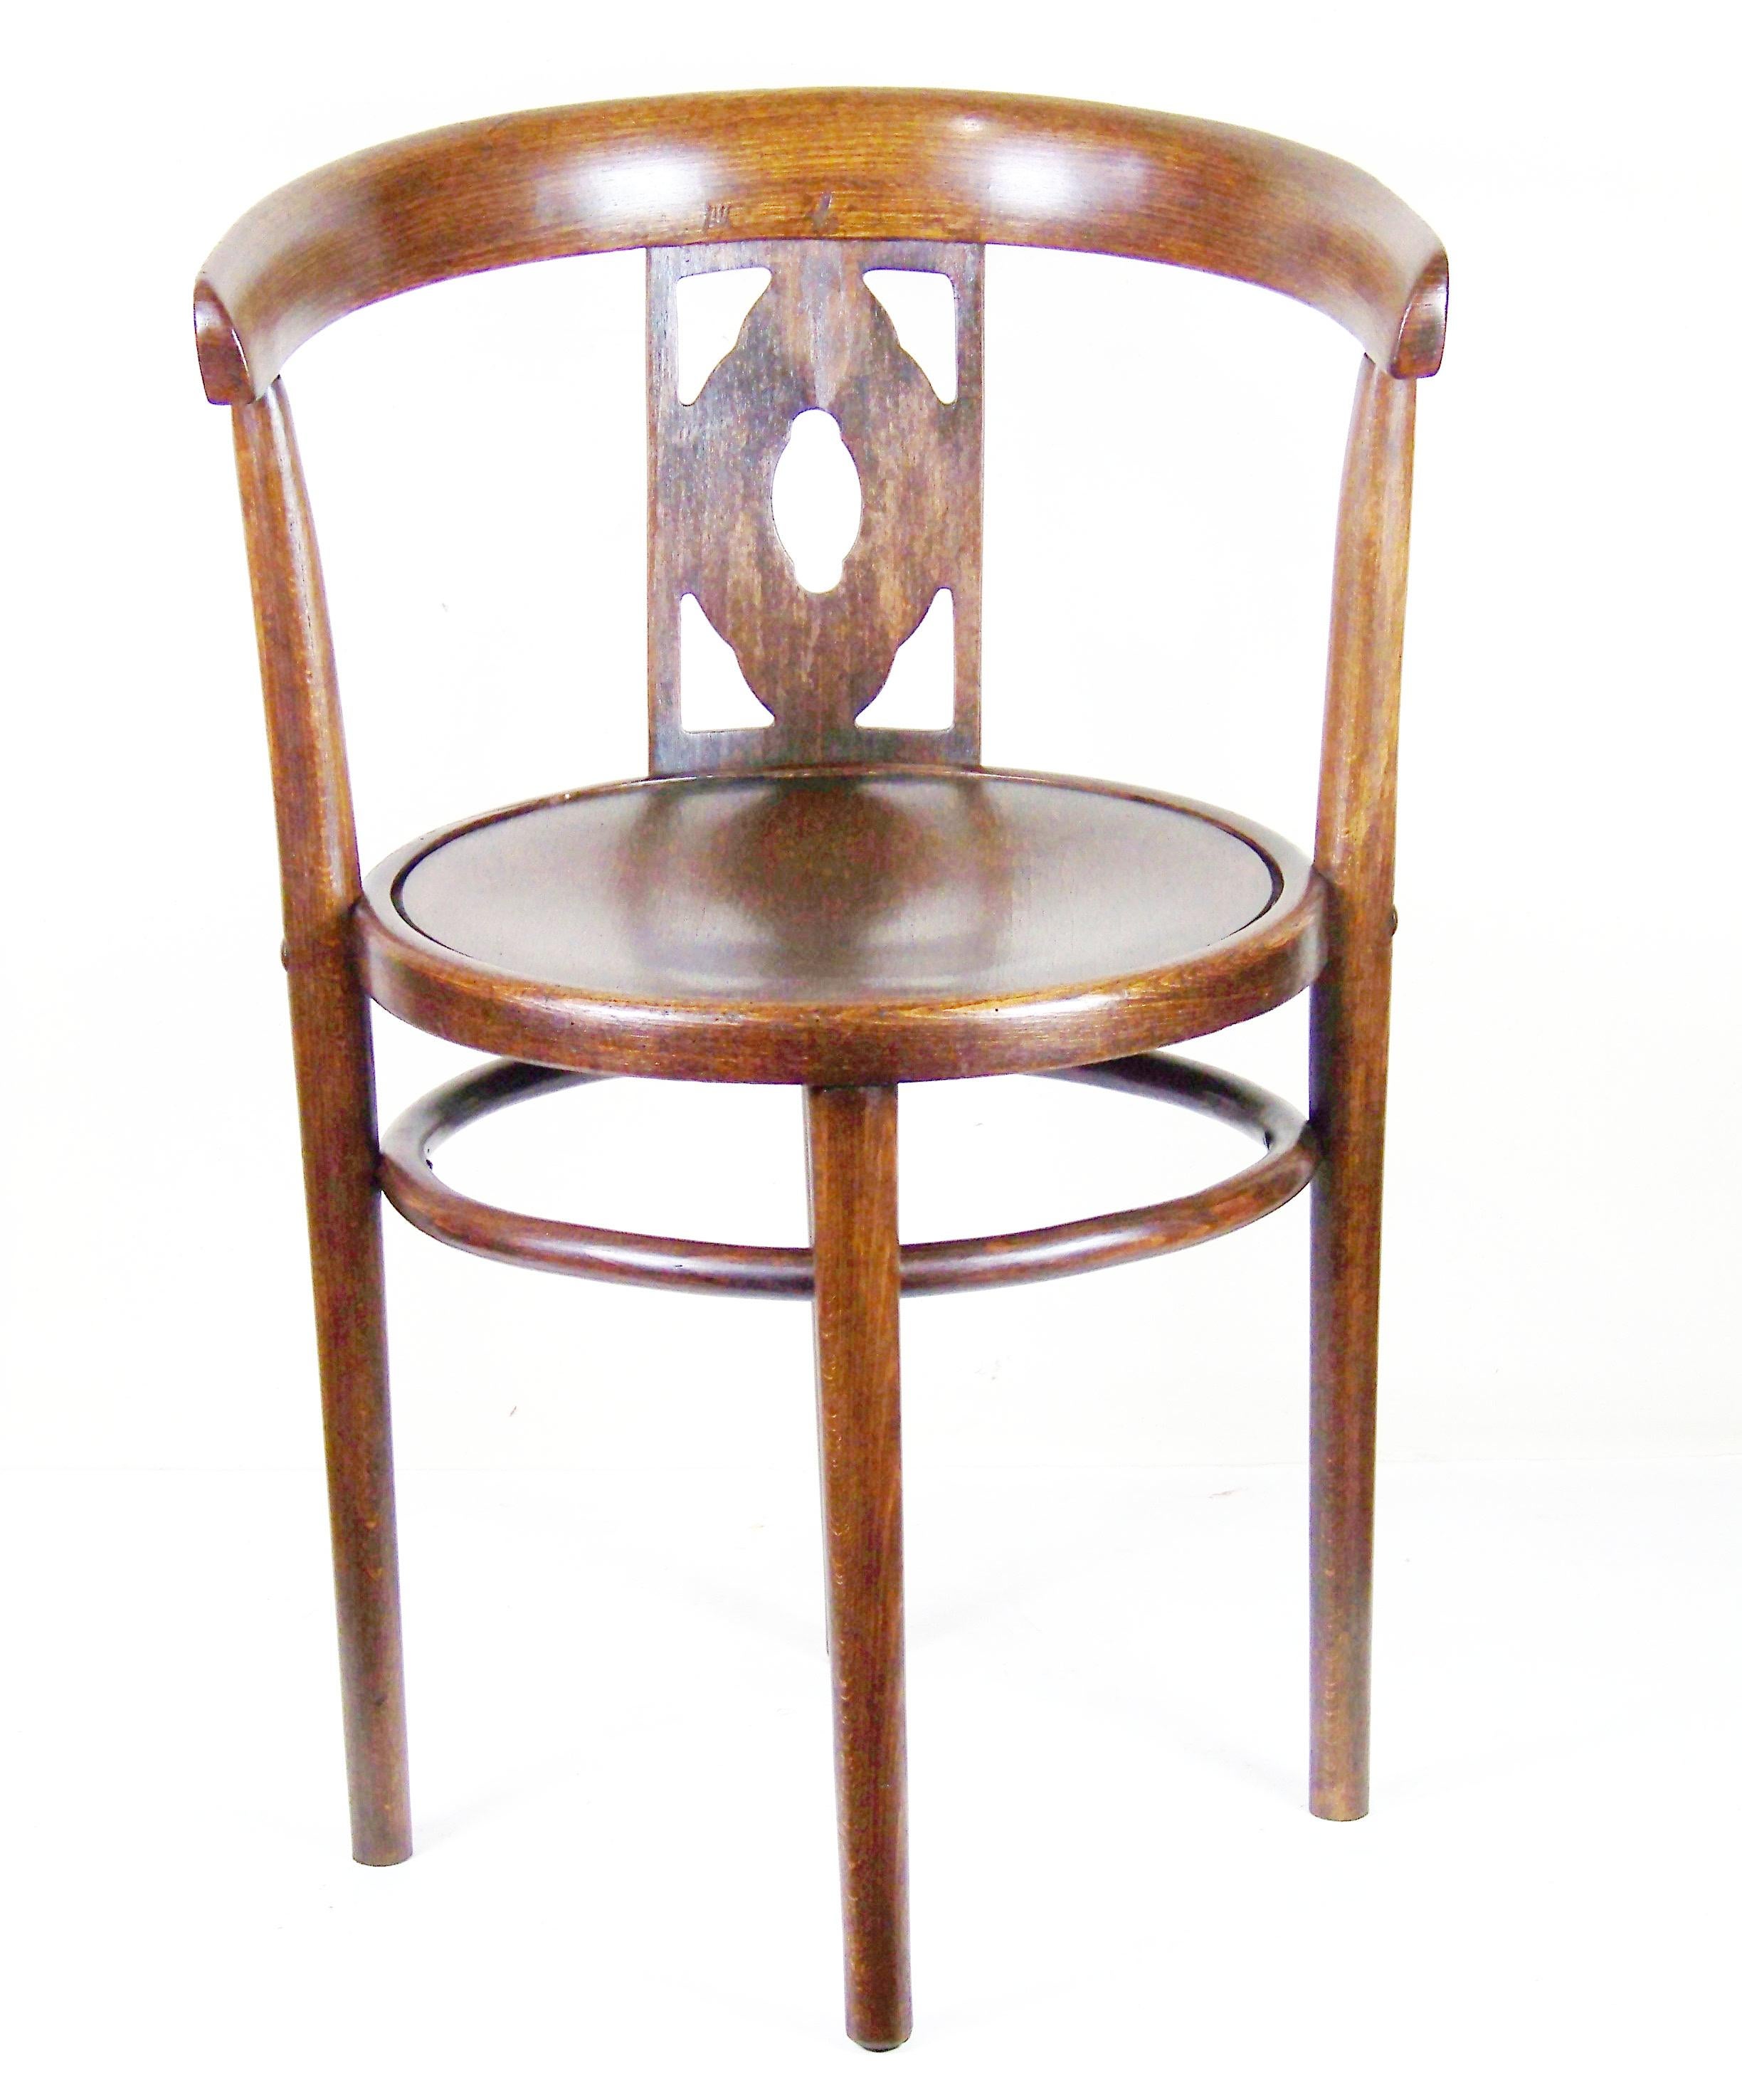 In beautiful original condition, perfectly cleaned and polished with shellac. The chair has an interesting finish - imitation oak wood (which was created by drilling artificial pores imitating oak wood into beech wood and staining it in the